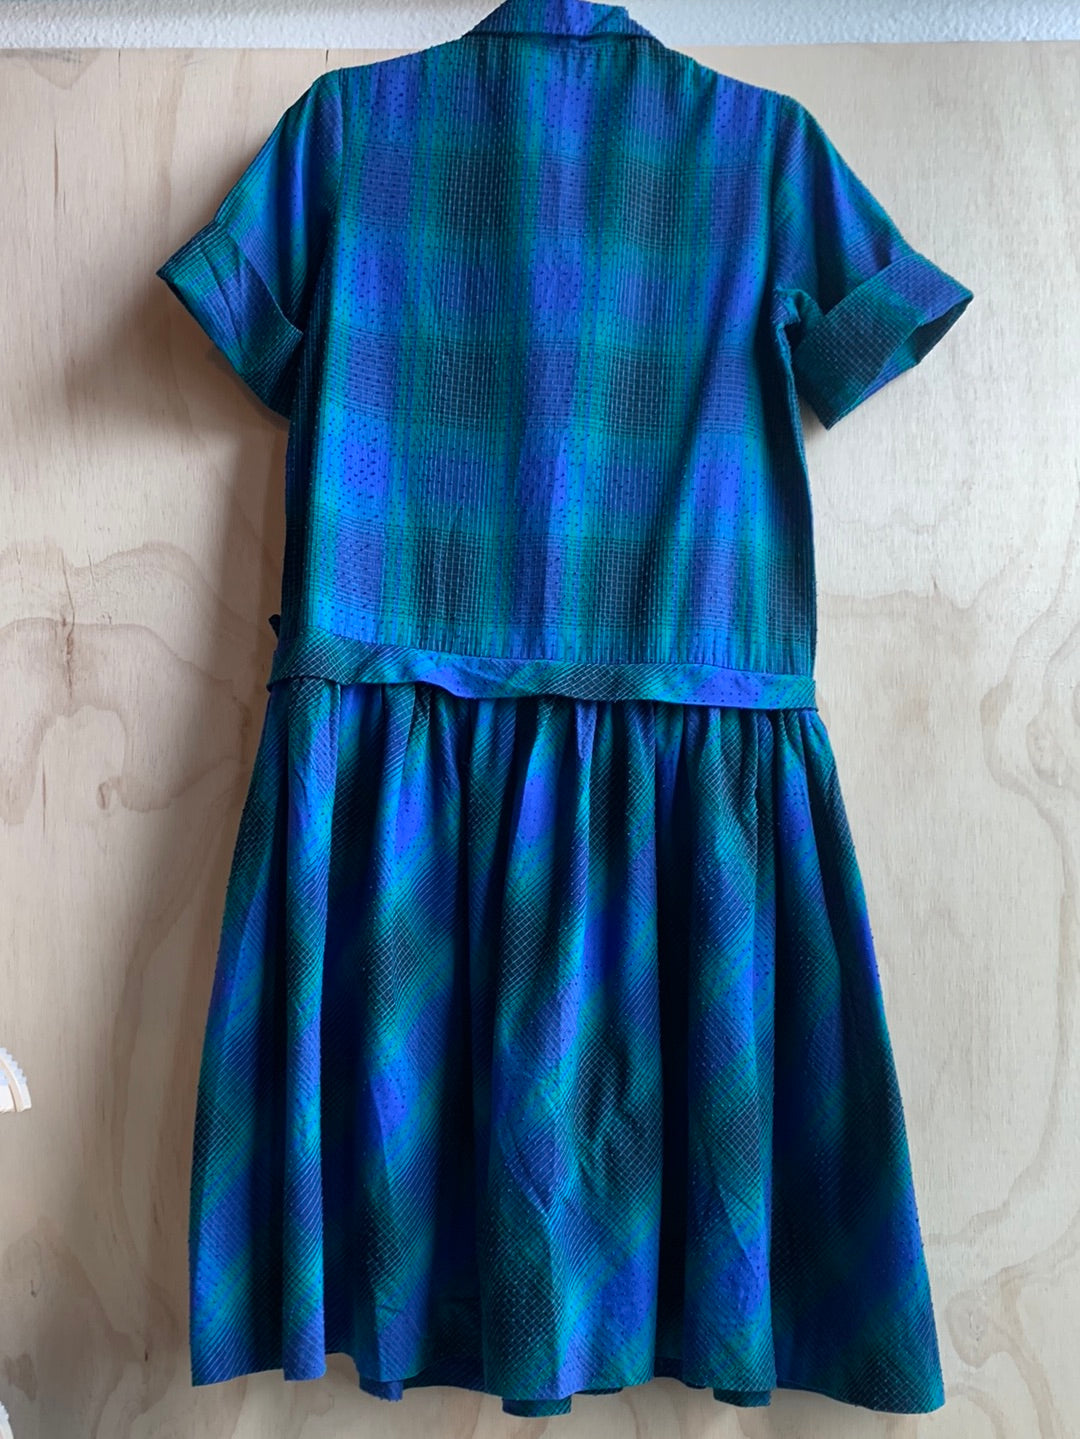 Vintage blue & green plaid dress with bow